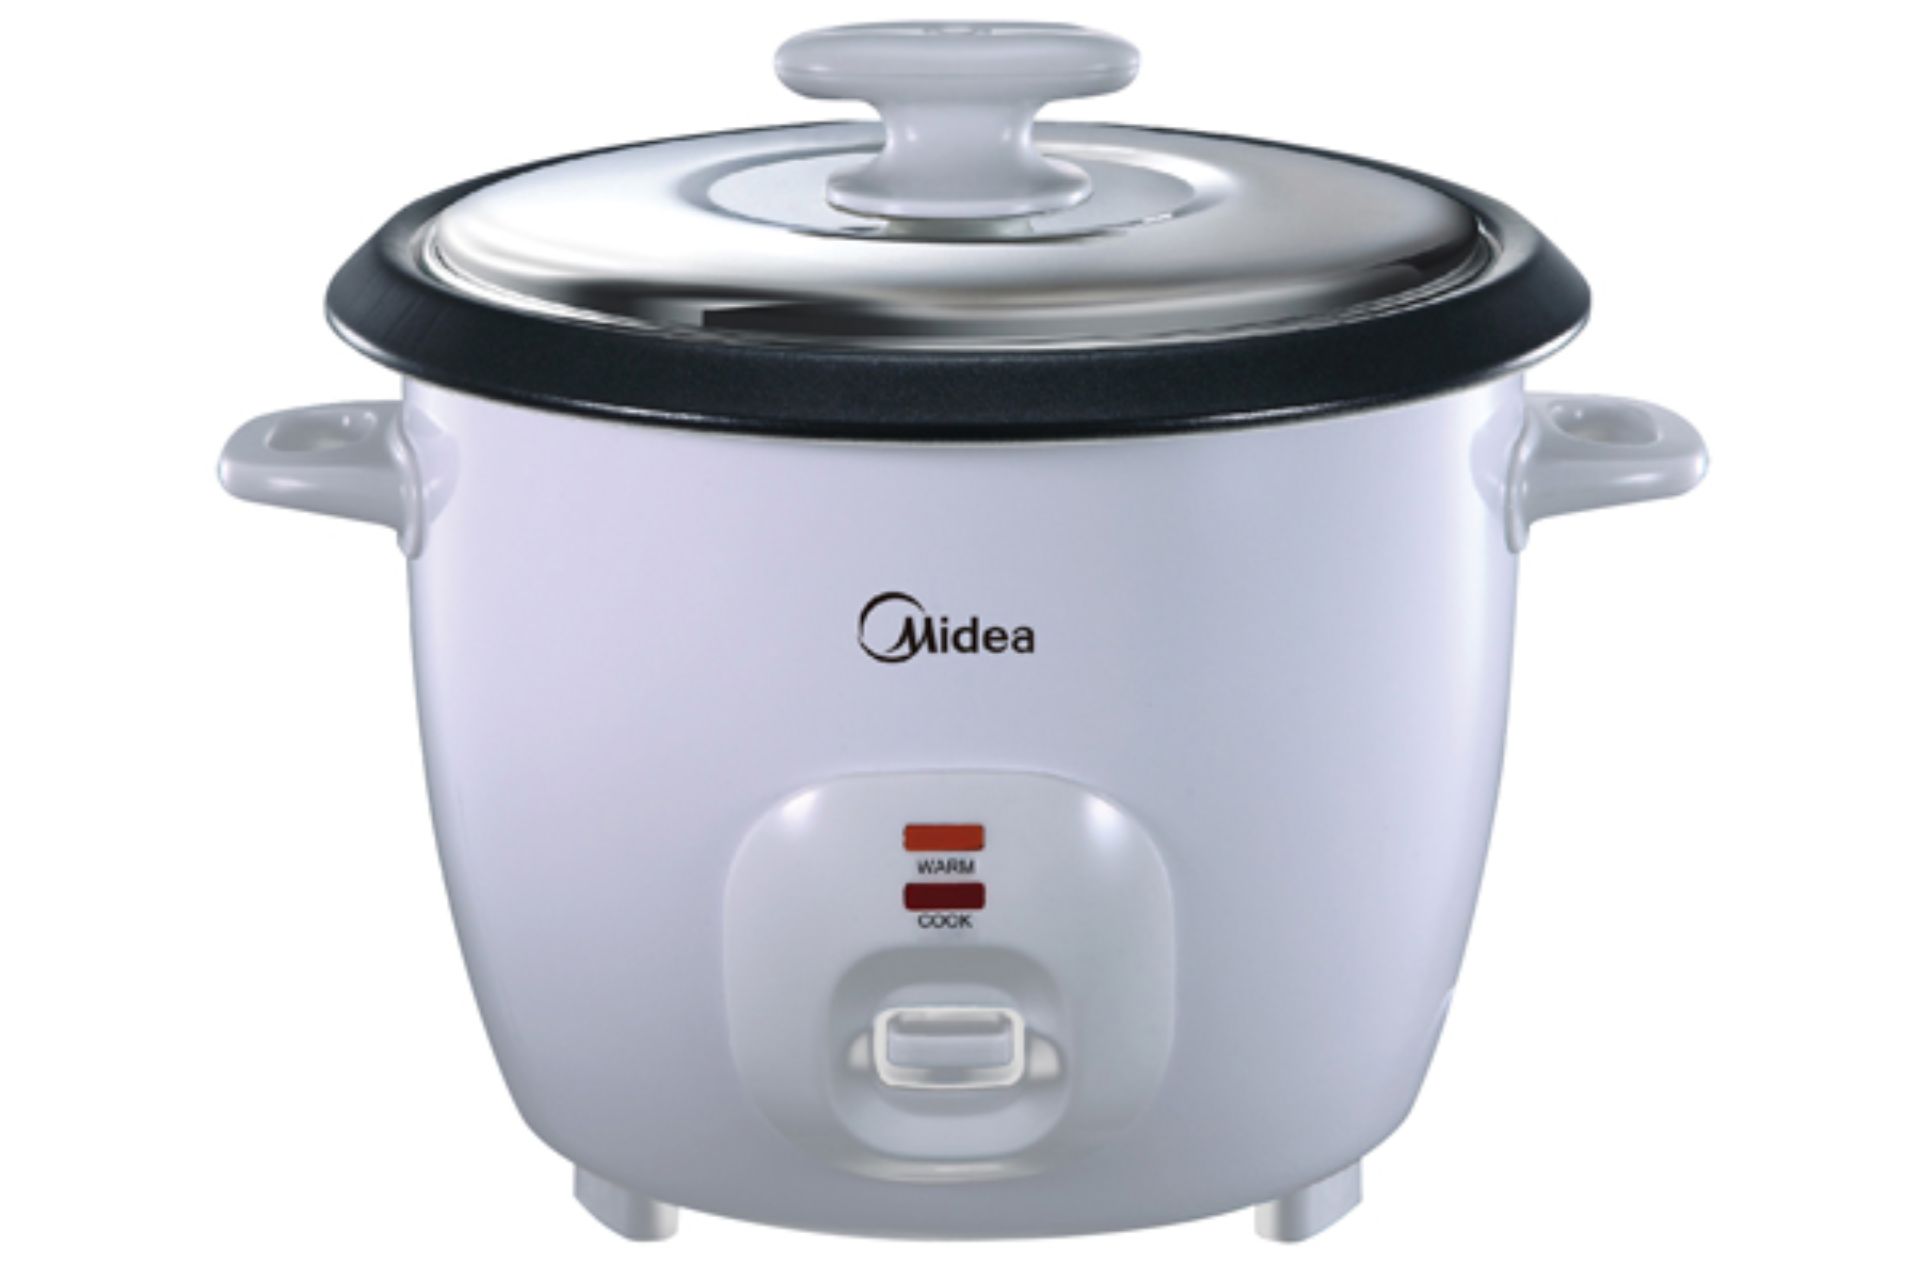 https://www.midea.com/content/dam/midea-aem/my/kitchen-appliances/cookers/rice-cookers/1-8l-conventional-rice-cooker-mg-gp18b/gallery1.jpg